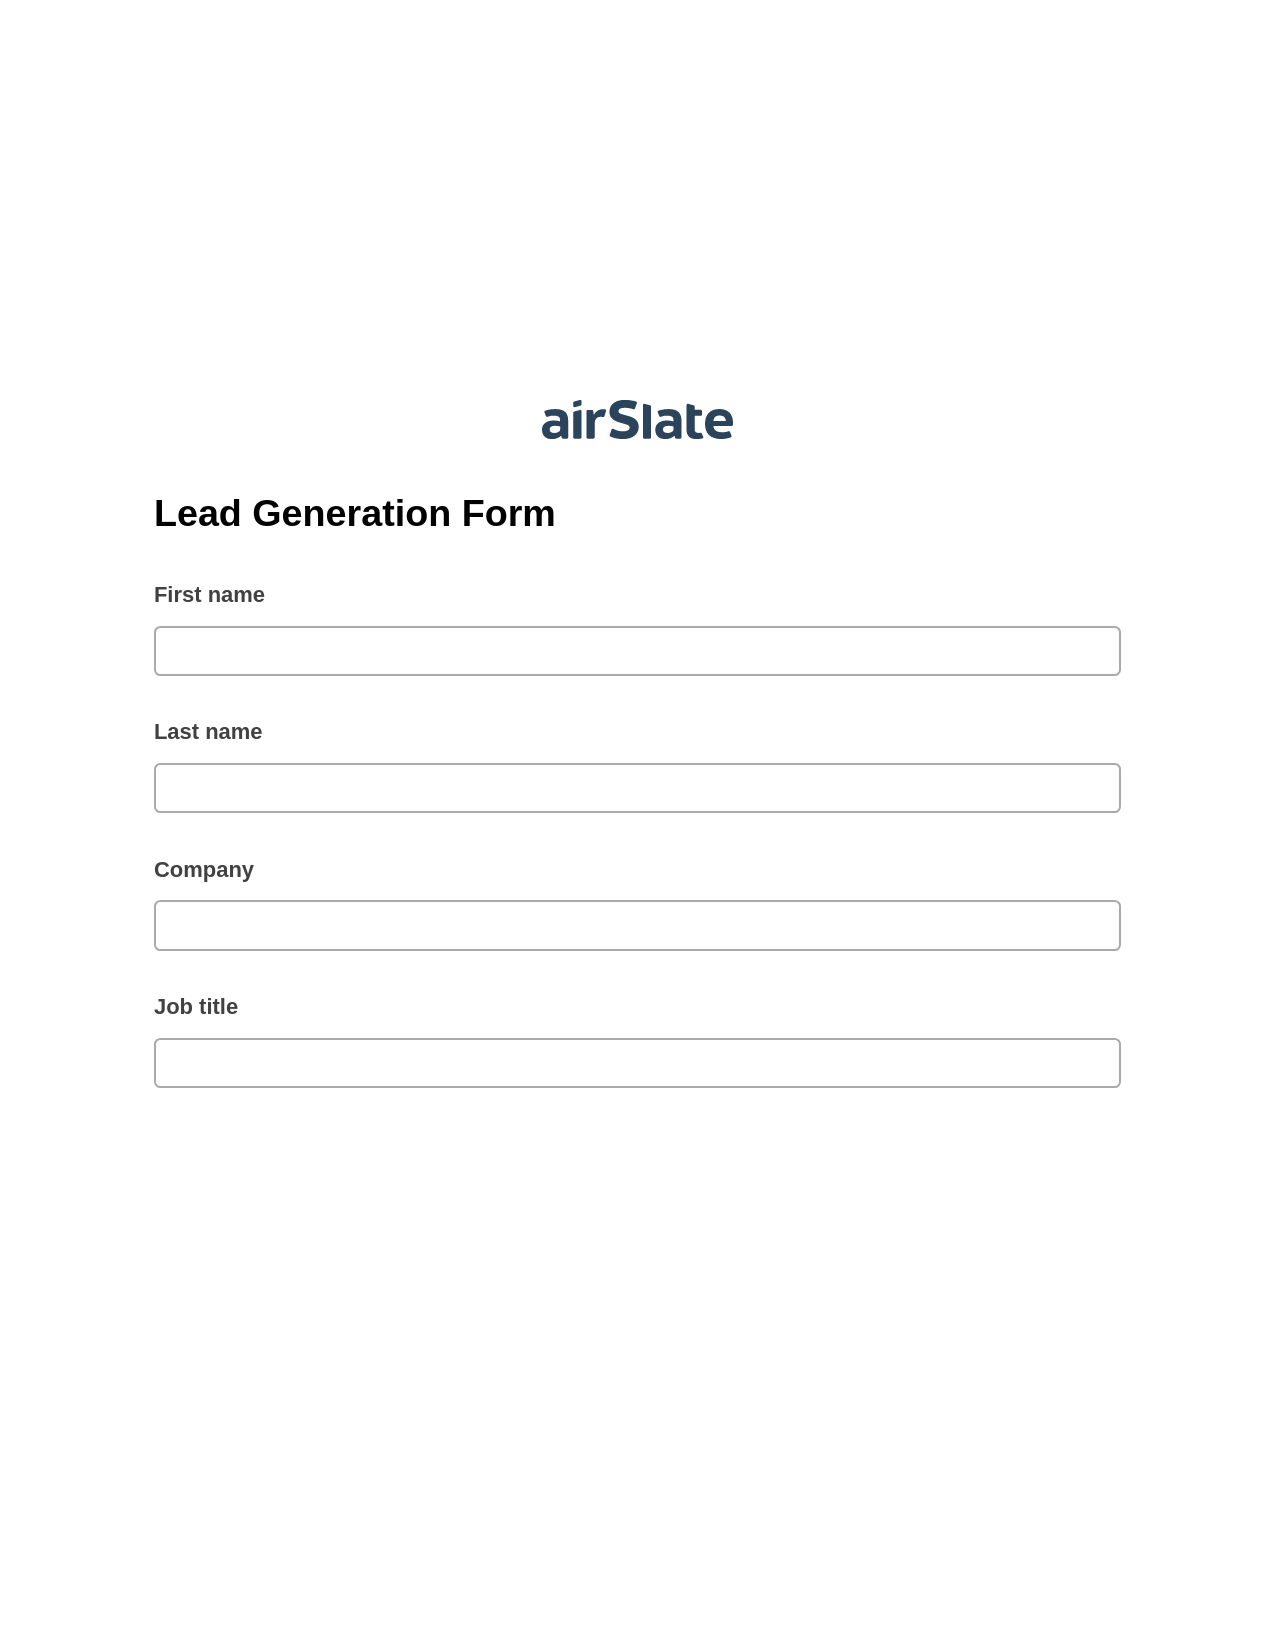 Lead Generation Form Pre-fill from CSV File Bot, Assign Roles to Recipients Bot, Post-finish Document Bot